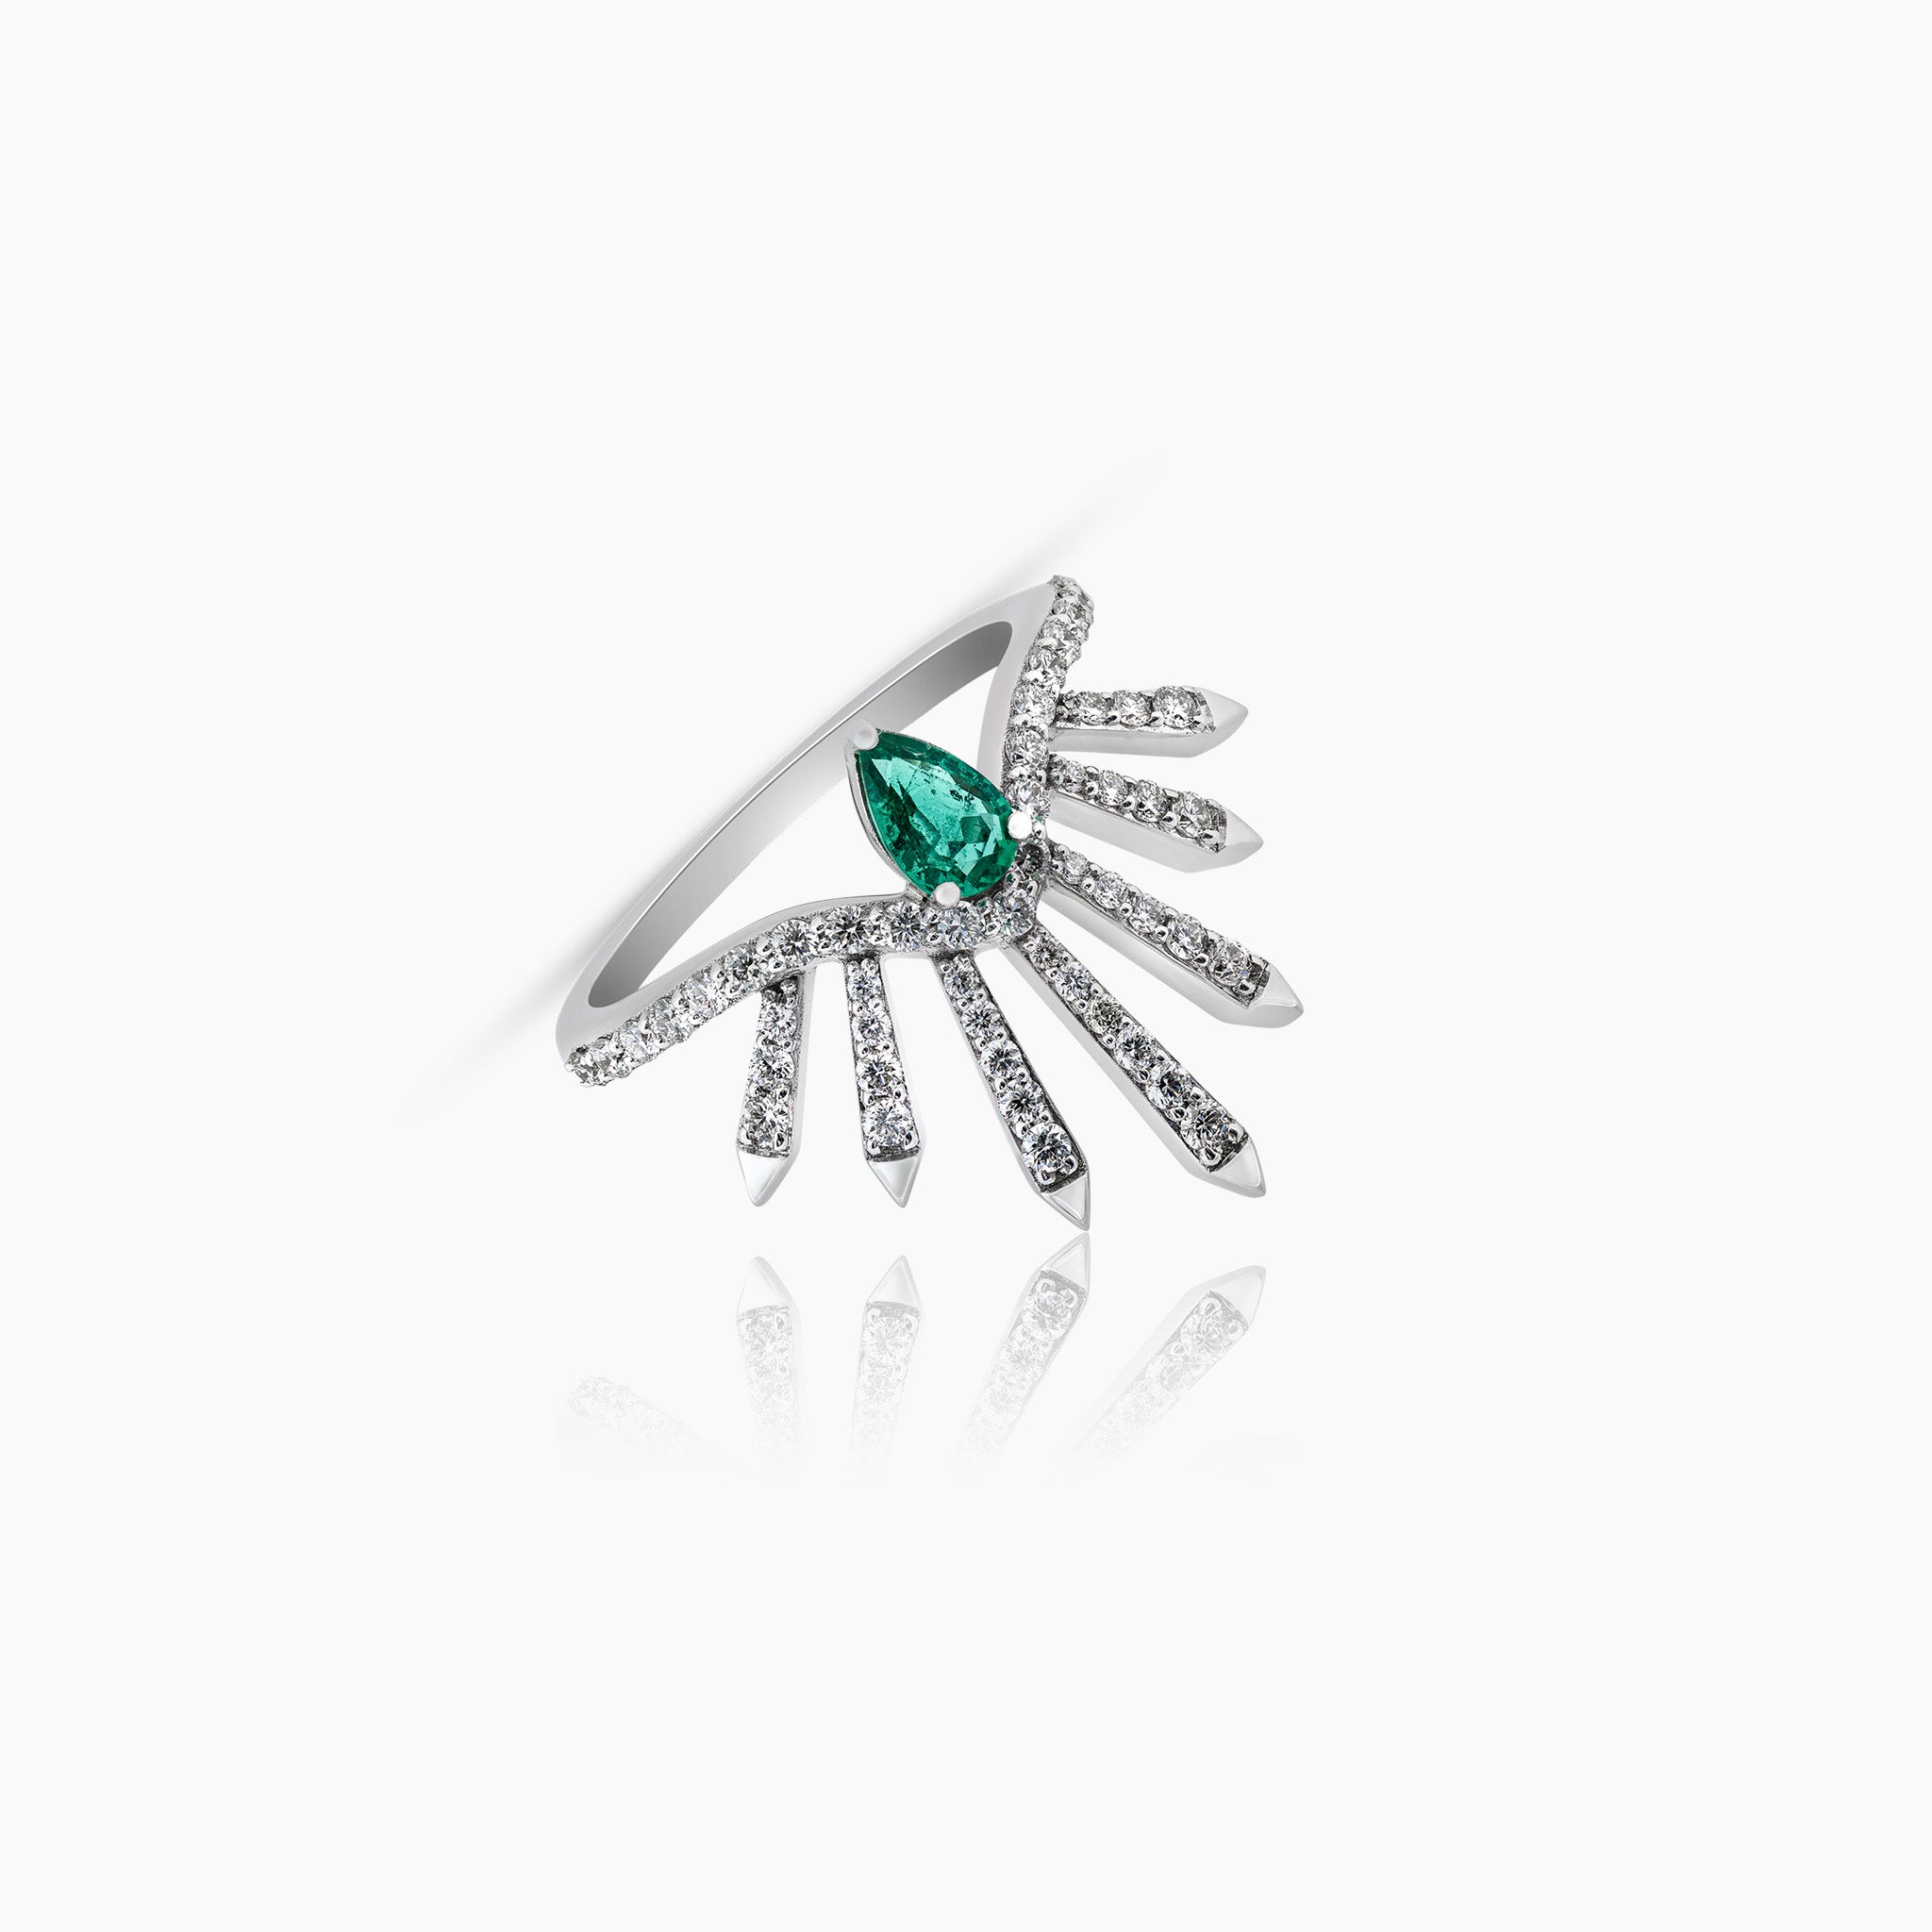 Dragon Ring: Crafted in white gold and adorned with a single Zambian emerald and diamonds, displayed against an off-white background.